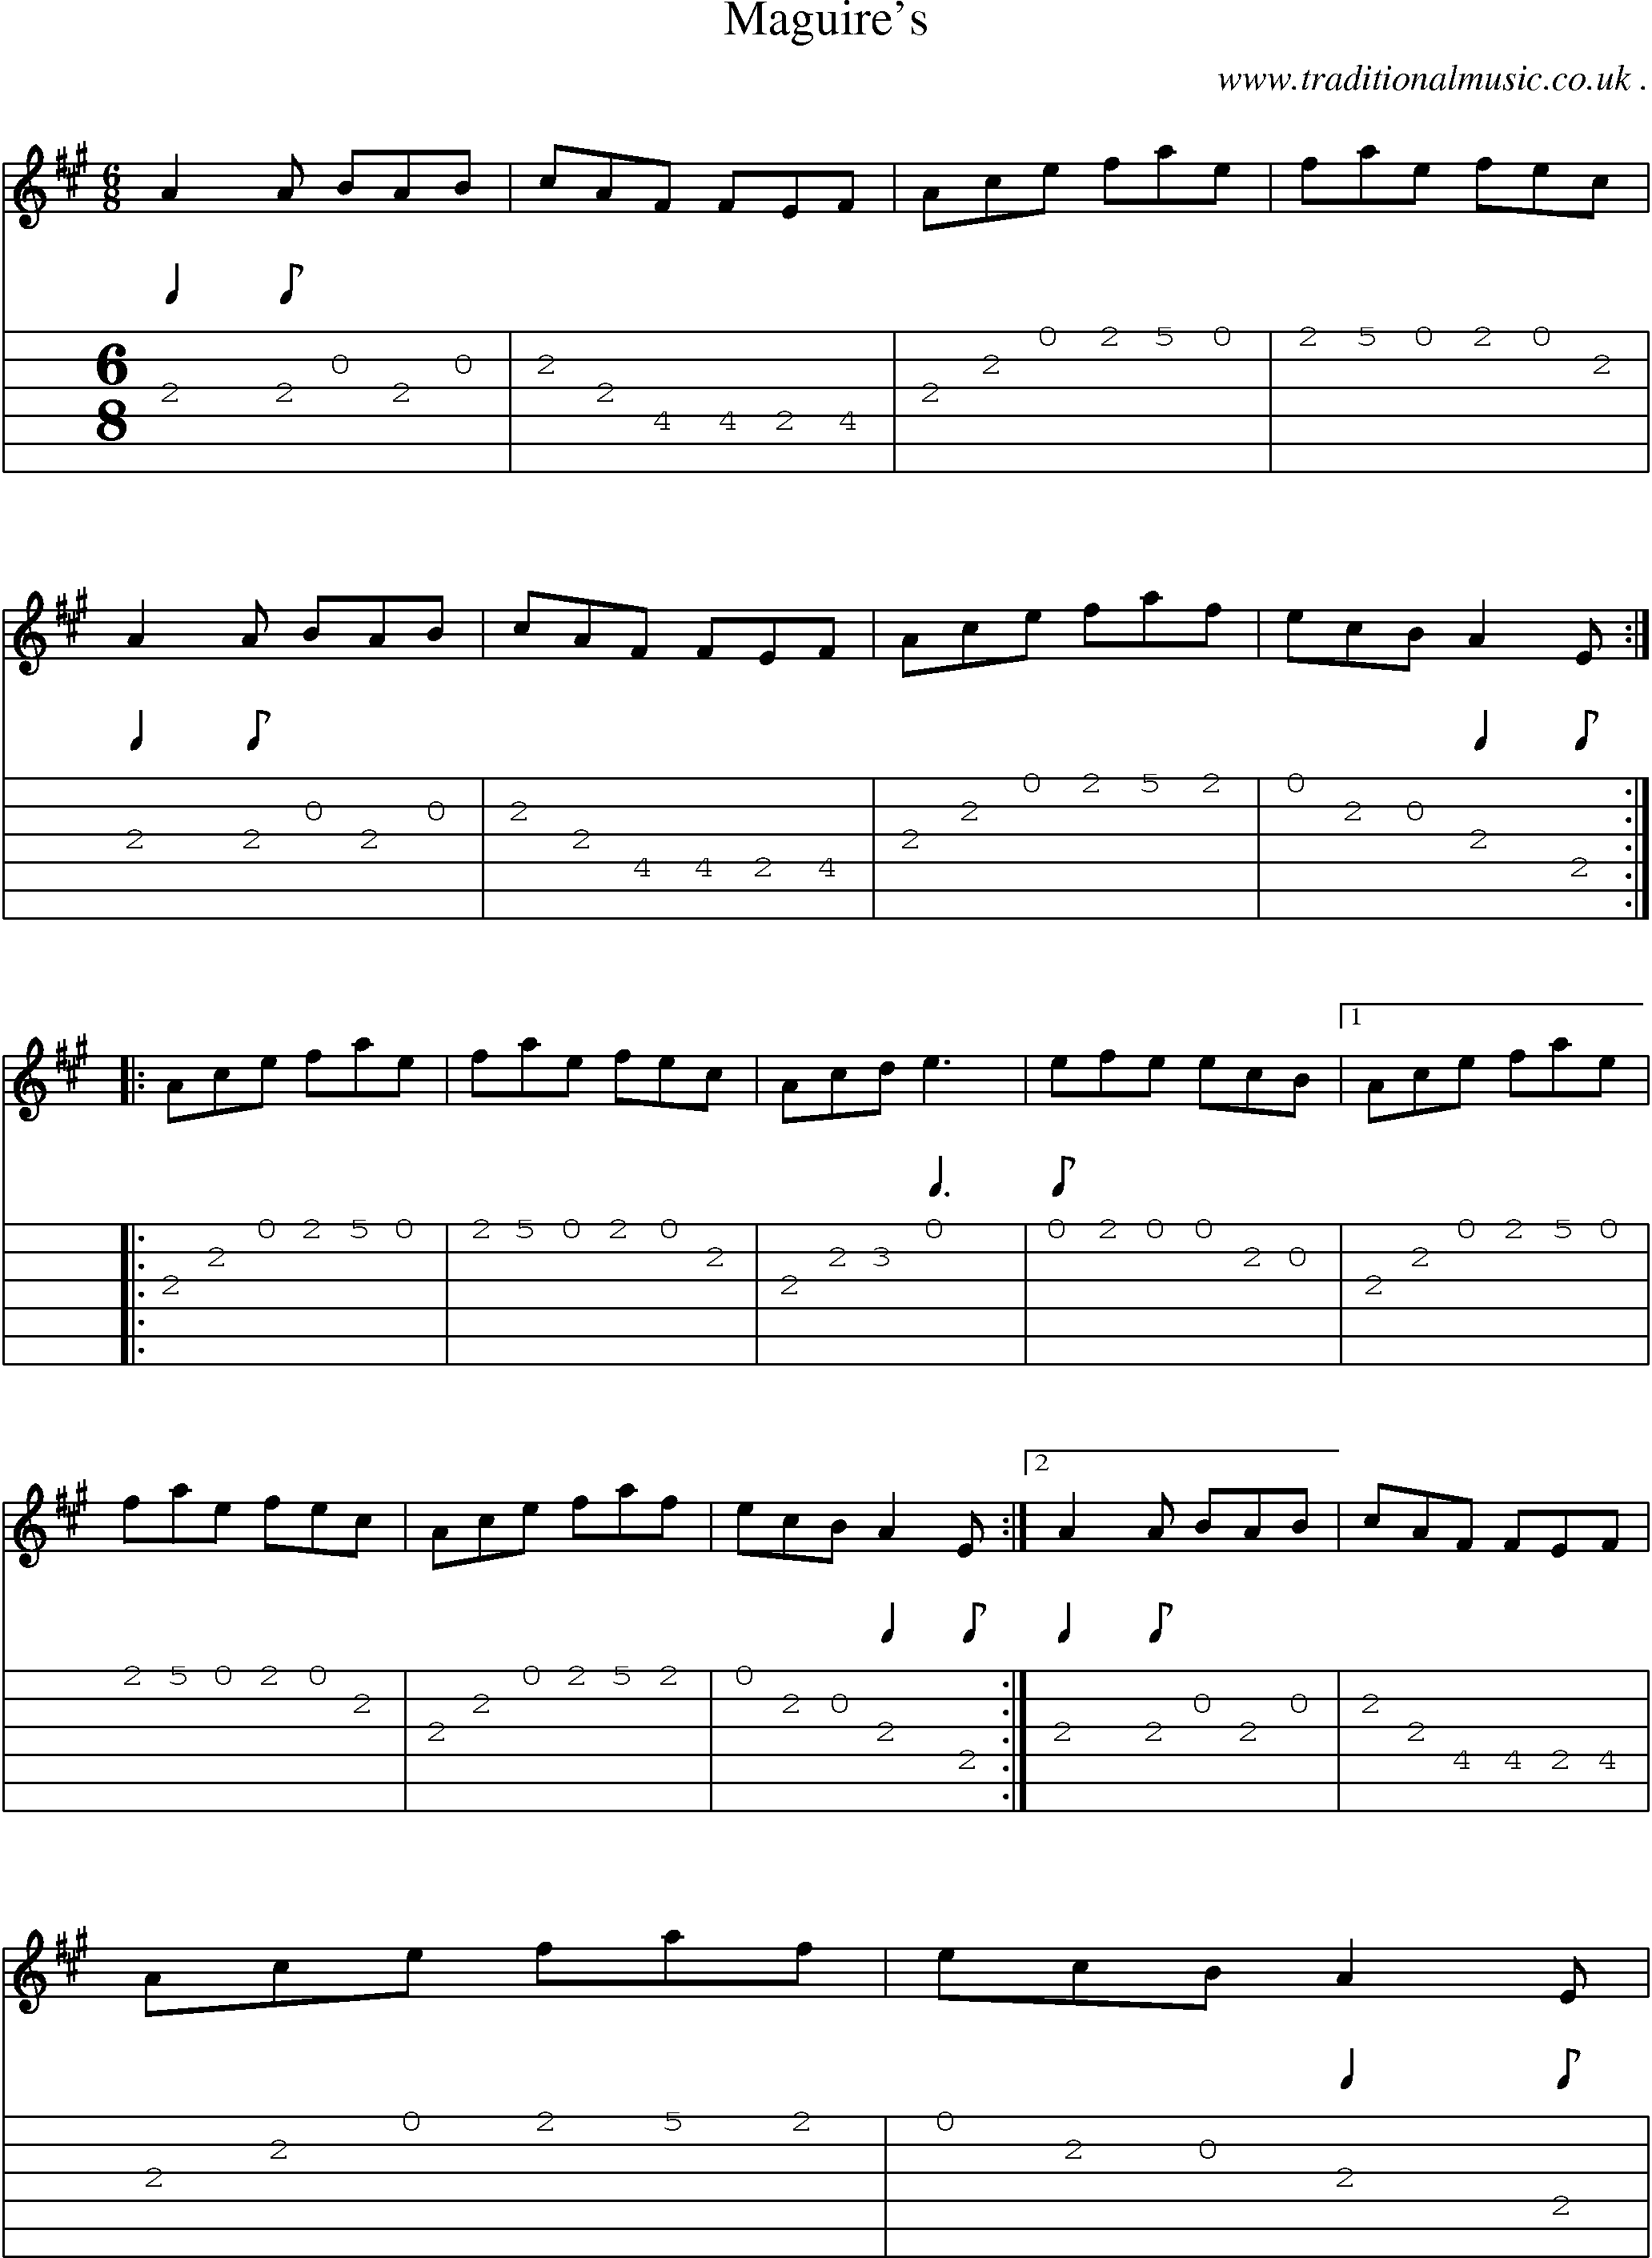 Sheet-Music and Guitar Tabs for Maguires